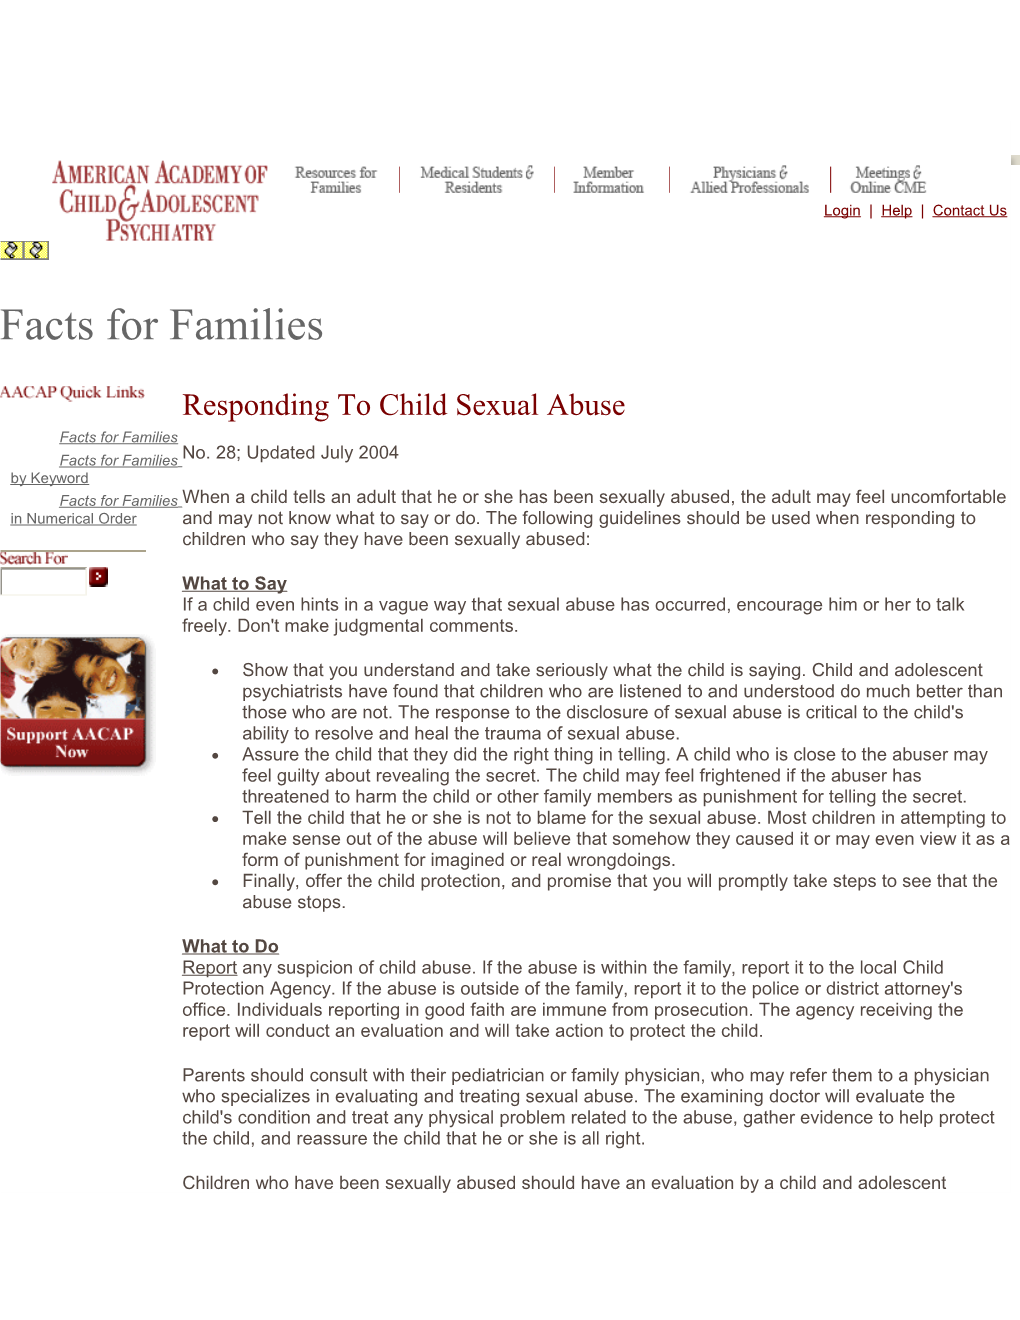 Facts for Families by Keyword